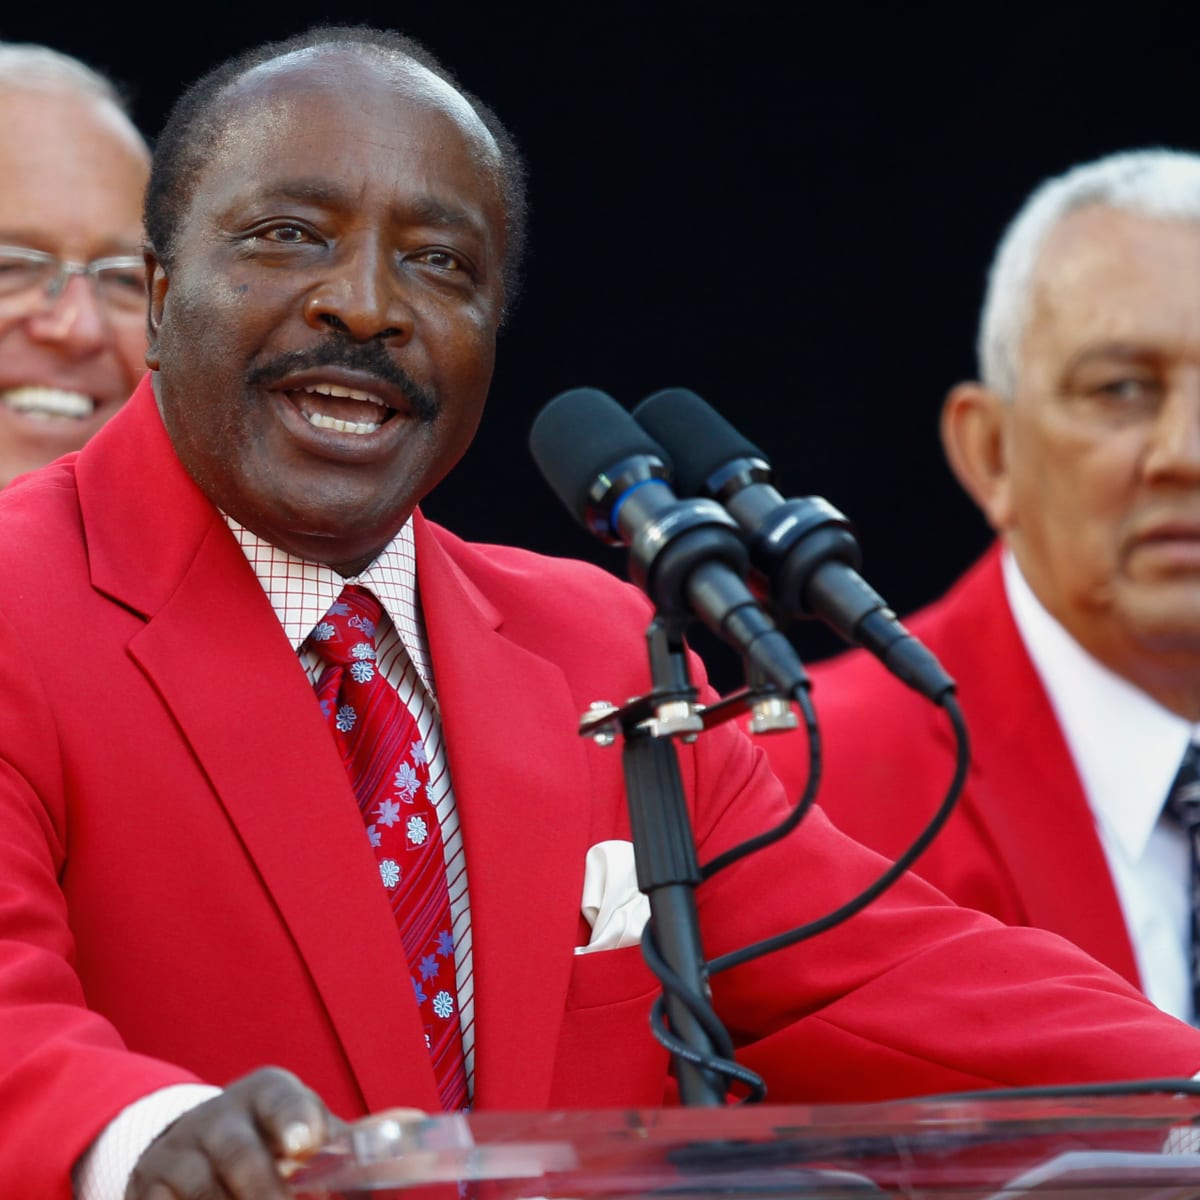 Read Joe Morgan's letter on steroids to Hall of Fame voters